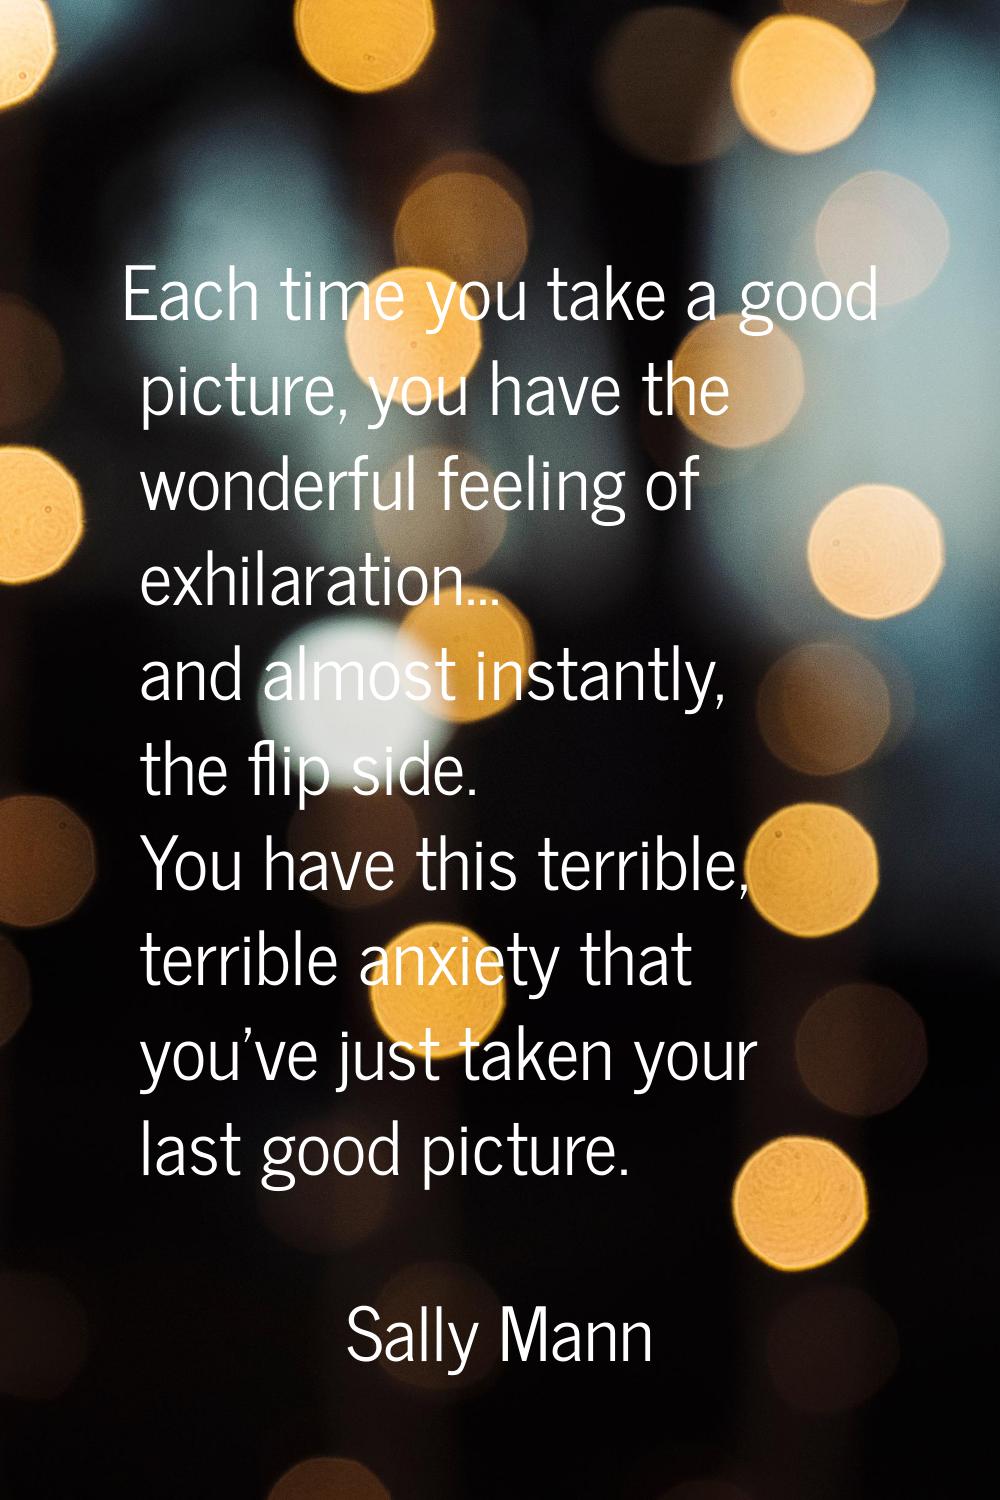 Each time you take a good picture, you have the wonderful feeling of exhilaration... and almost ins